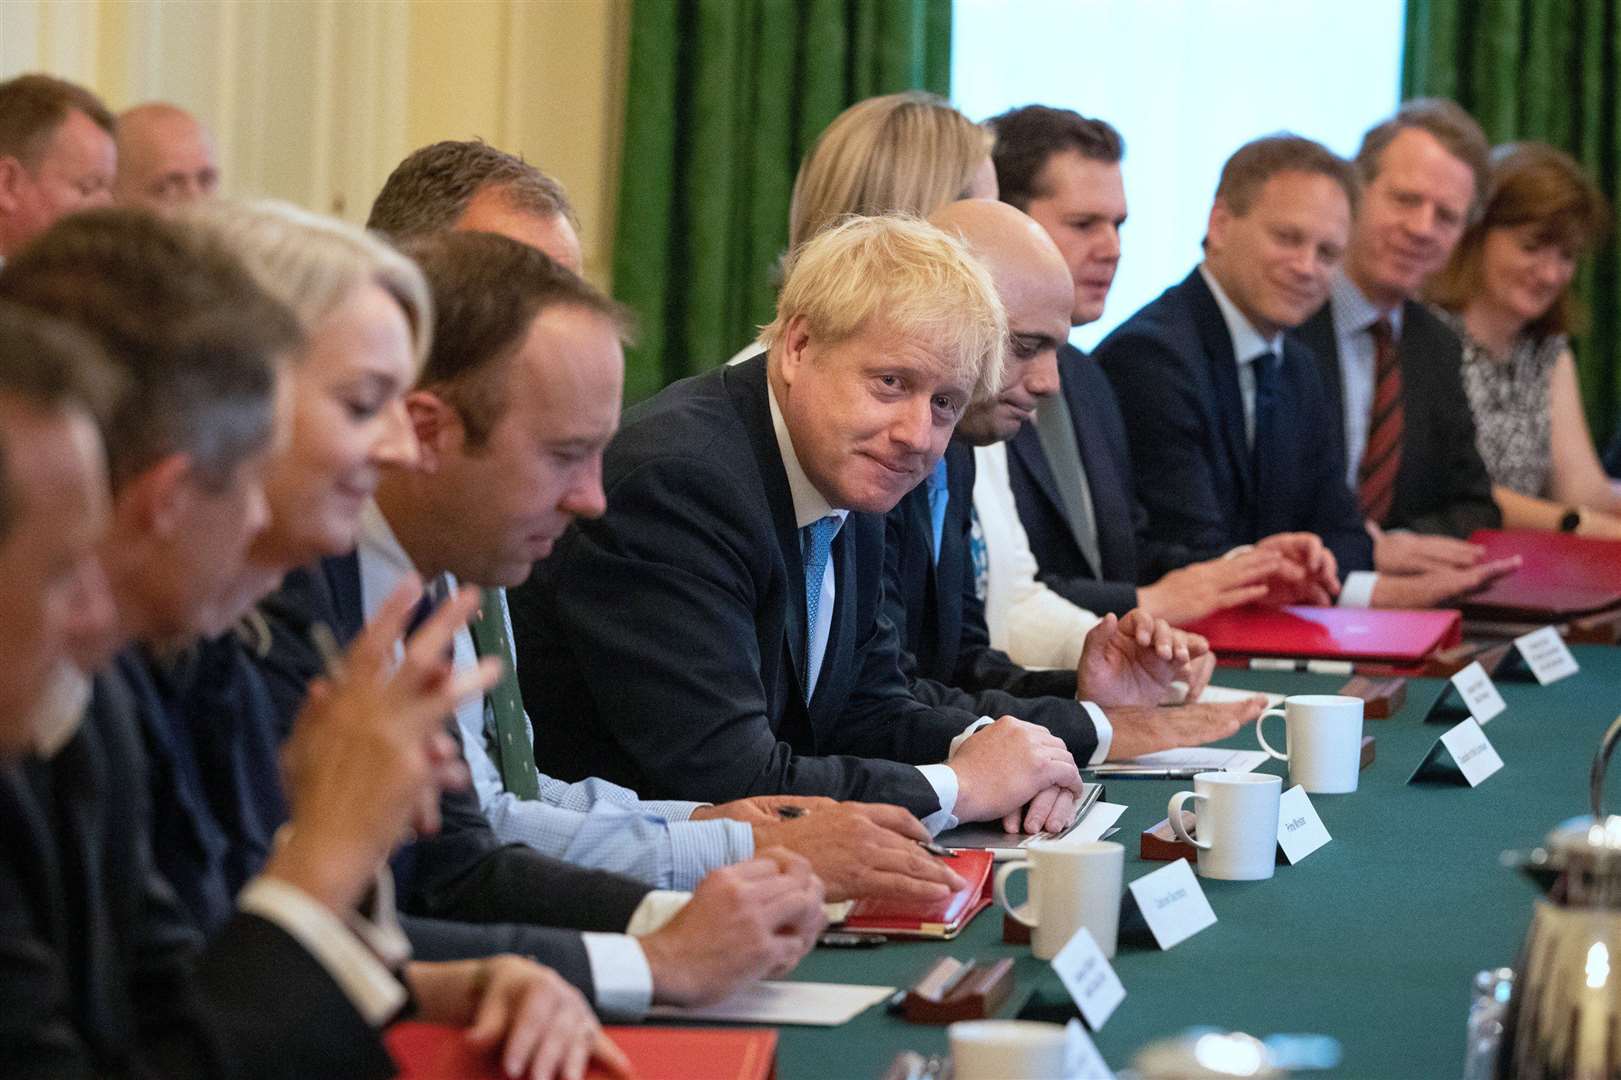 Prime Minister Boris Johnson chairing his first cabinet meeting in Downing Street.